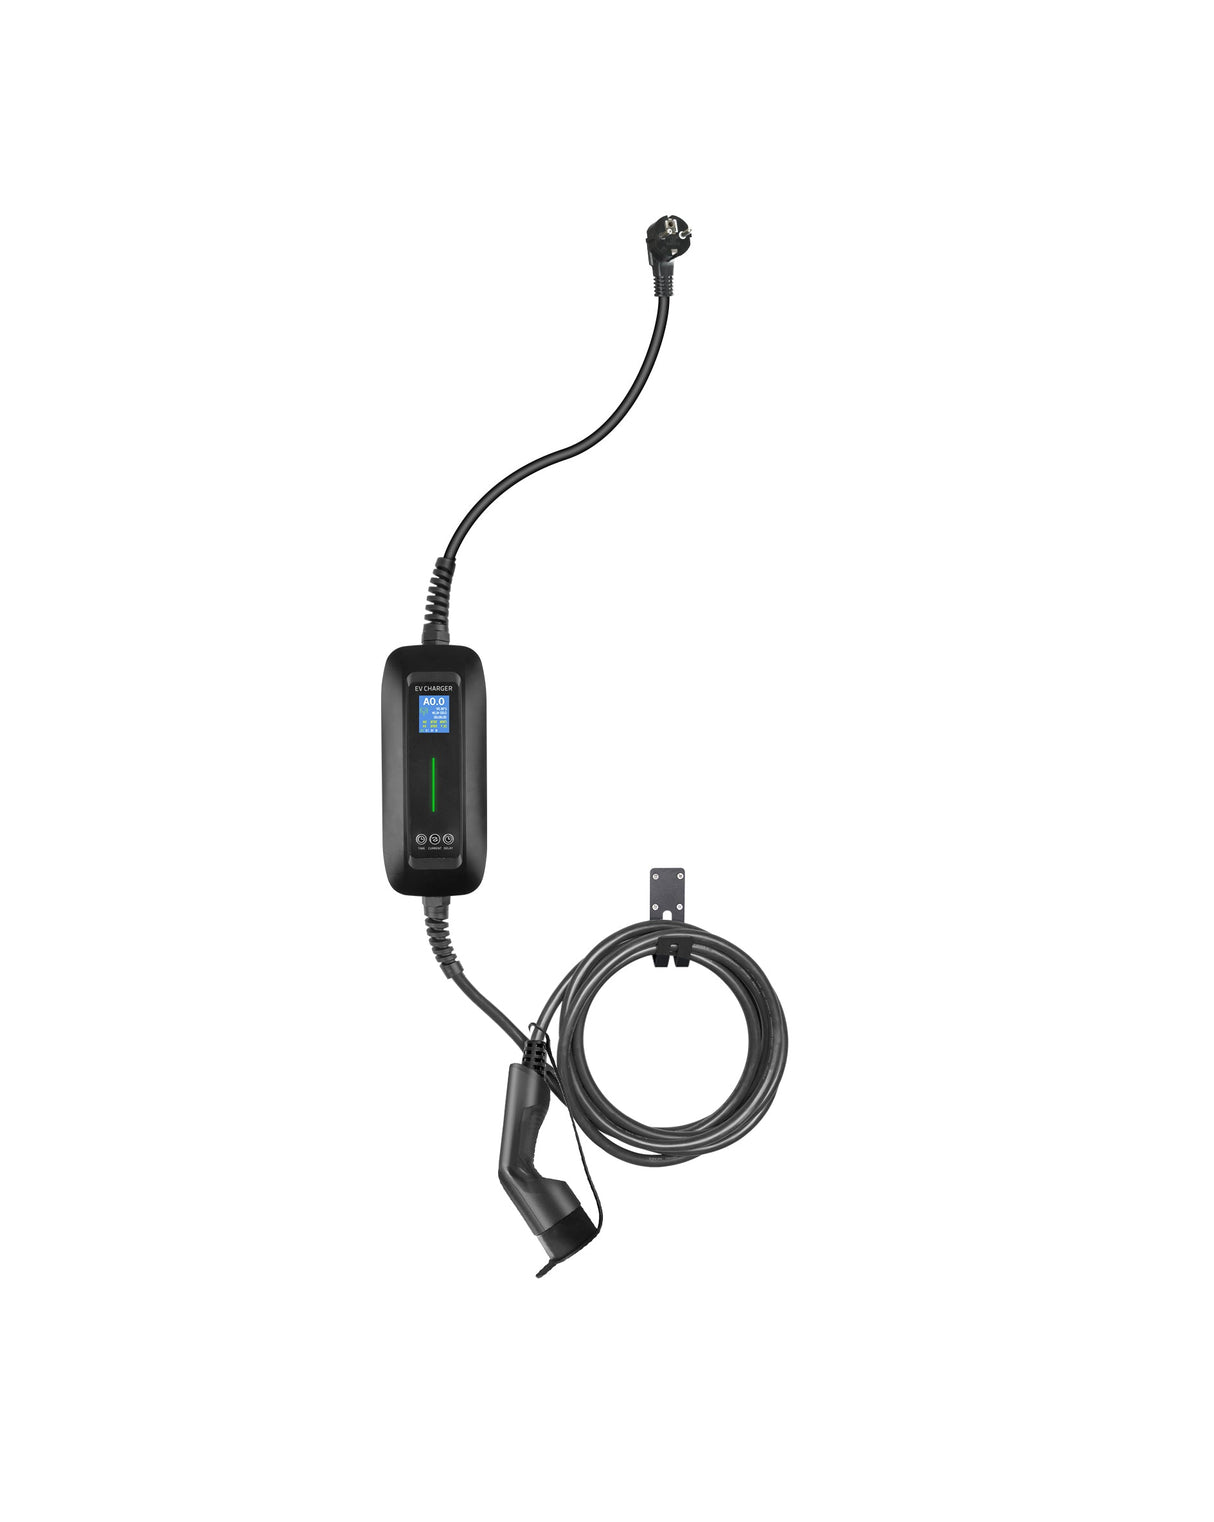 Mobile Charger Smart EQ forfour - LCD Black Type 2 to Schuko - Delayed charging and Memory function